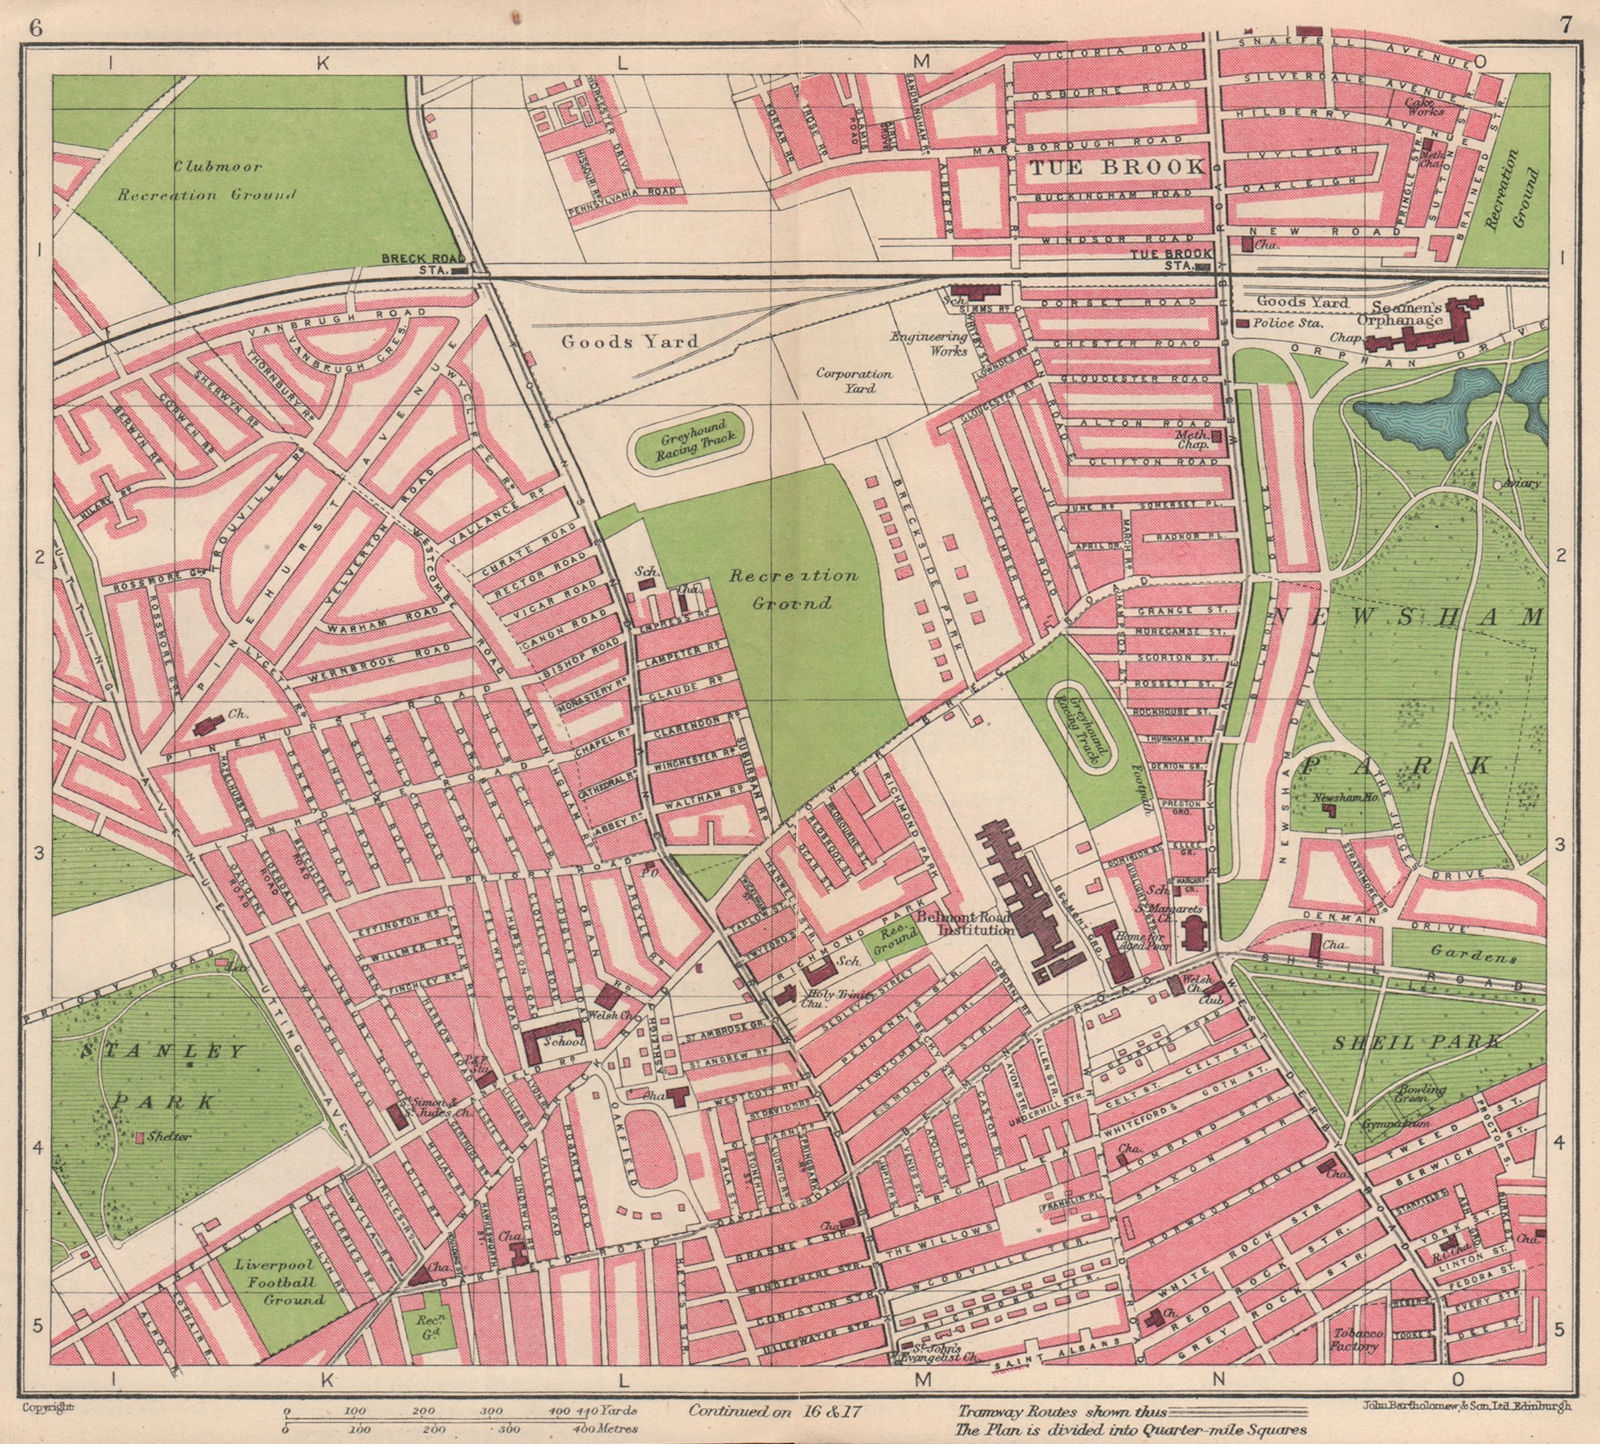 LIVERPOOL. Anfield Everton Tue Brook Newsham Park Breck Road 1949 old map